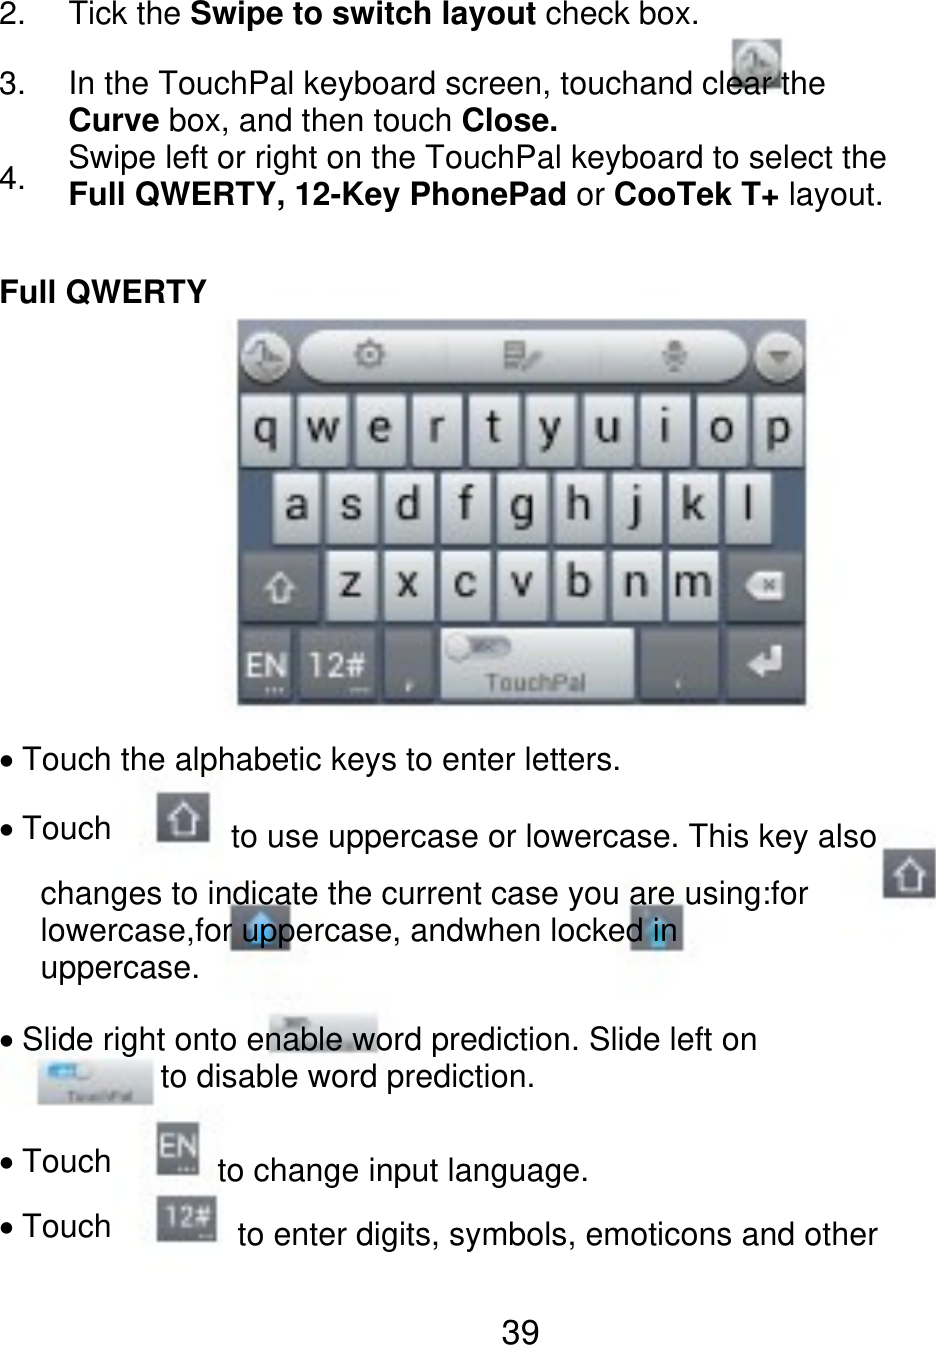 2. 3. 4. Tick the Swipe to switch layout check box. In the TouchPal keyboard screen, touchand clear the Curve box, and then touch Close. Swipe left or right on the TouchPal keyboard to select the Full QWERTY, 12-Key PhonePad or CooTek T+ layout. Full QWERTY Touch the alphabetic keys to enter letters. Touch to use uppercase or lowercase. This key also changes to indicate the current case you are using:for lowercase,for uppercase, andwhen locked in uppercase. Slide right onto enable word prediction. Slide left on           to disable word prediction. Touch Touch to change input language. to enter digits, symbols, emoticons and other 39 